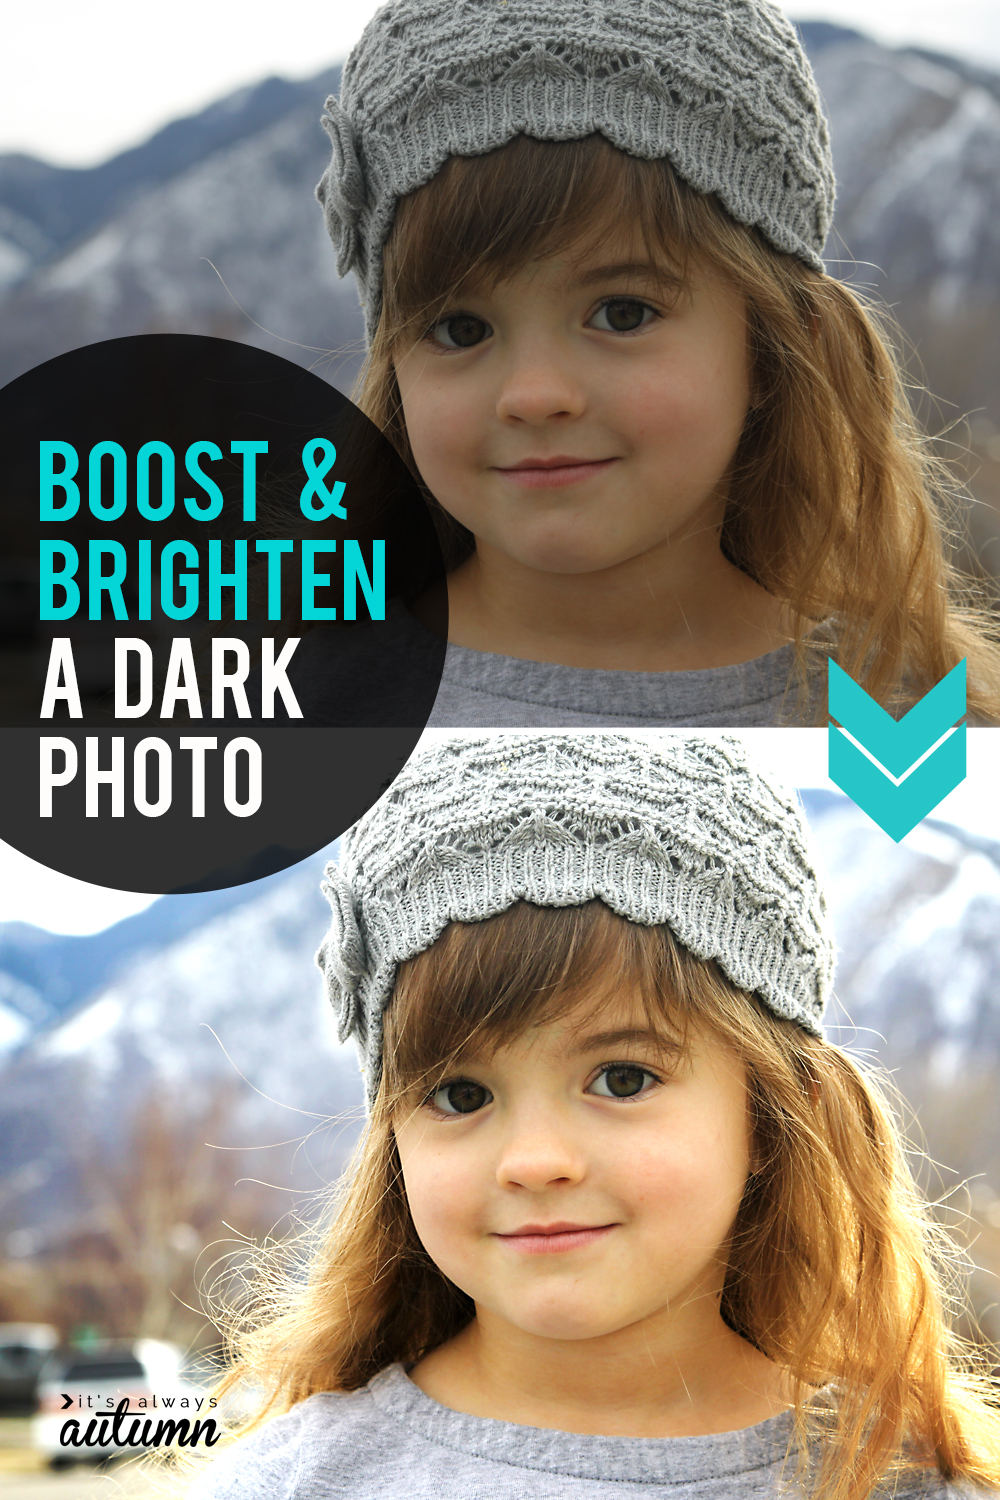 Learn how to brighten a dark photo. Easy photo editing tips for beginners.